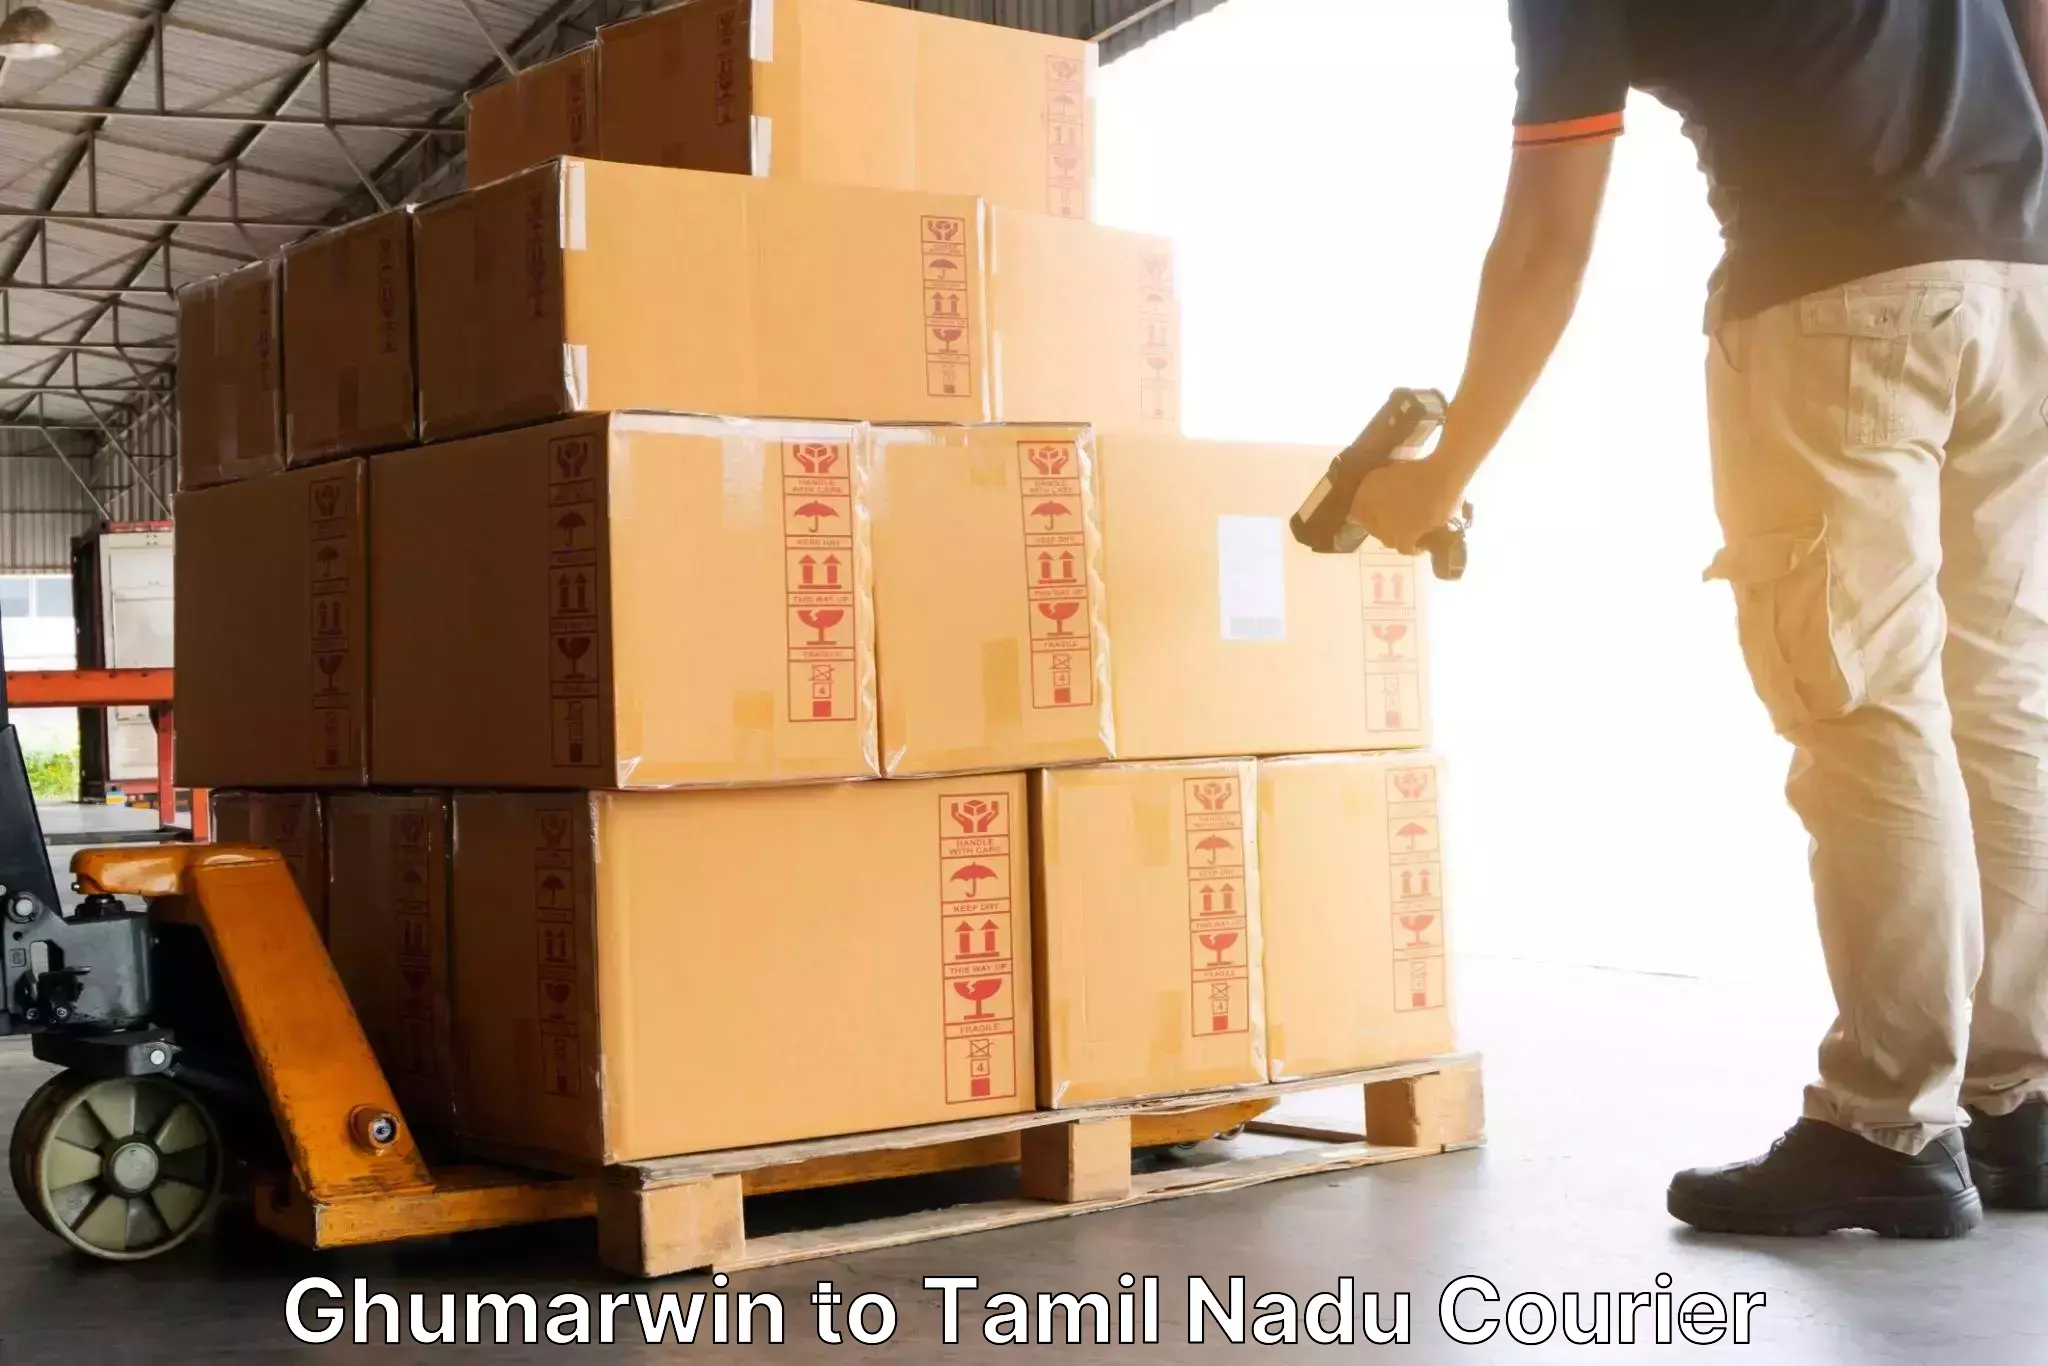 Reliable parcel services Ghumarwin to Pollachi